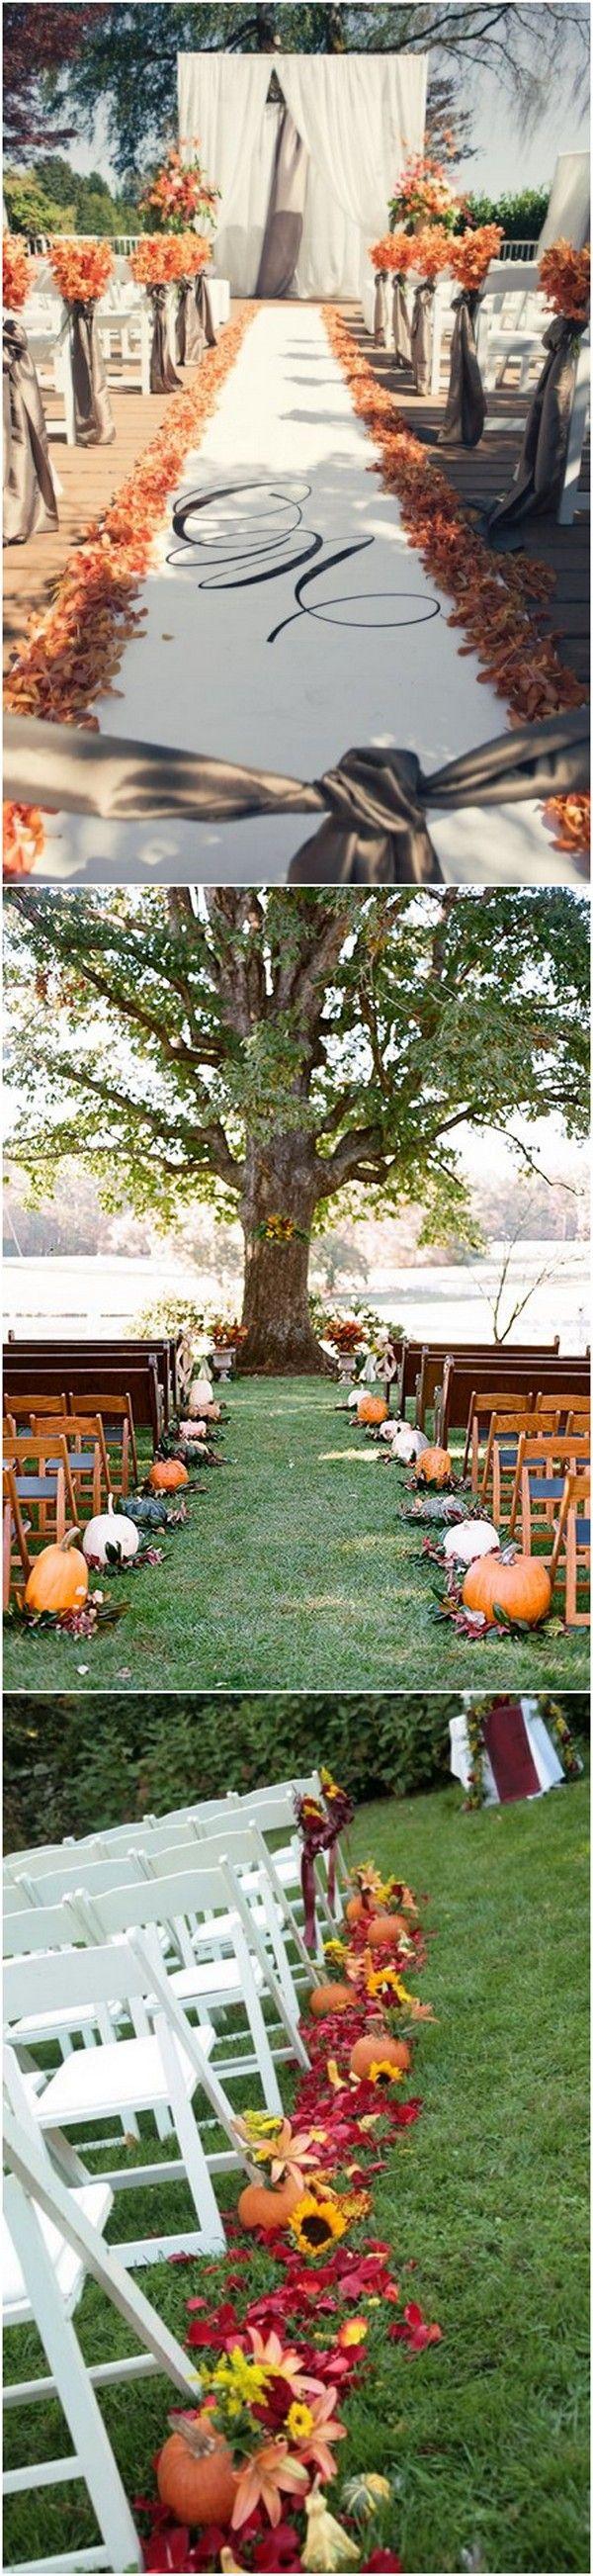 Wedding - 70  Amazing Fall Wedding Ideas For 2017 - Page 4 Of 4